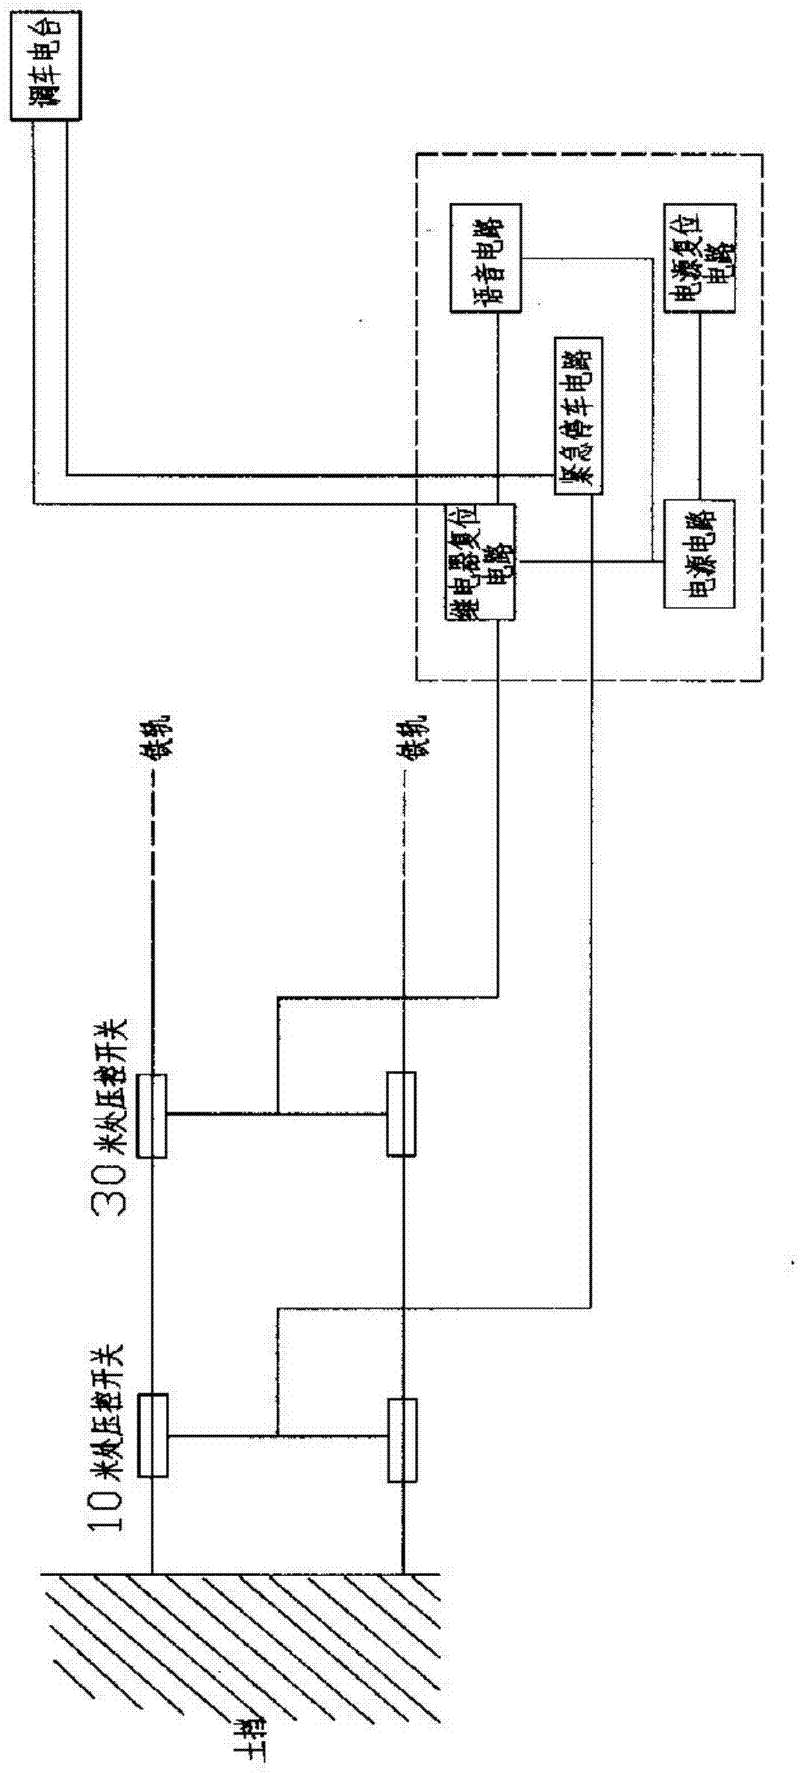 Railway vehicle emergency stopping device